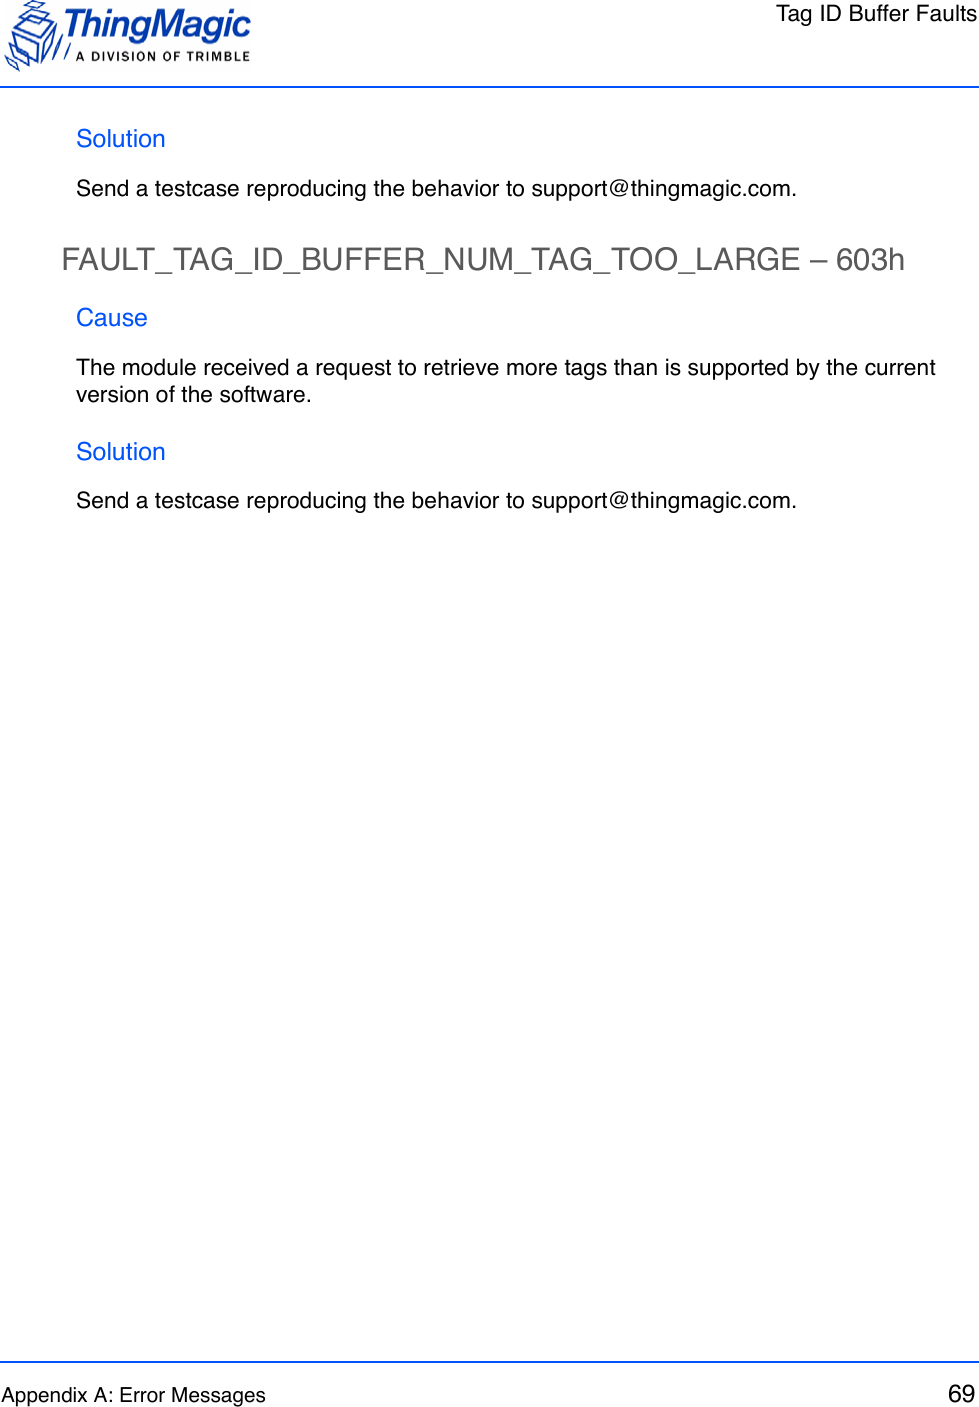 Tag ID Buffer FaultsAppendix A: Error Messages 69SolutionSend a testcase reproducing the behavior to support@thingmagic.com.FAULT_TAG_ID_BUFFER_NUM_TAG_TOO_LARGE – 603hCauseThe module received a request to retrieve more tags than is supported by the current version of the software.SolutionSend a testcase reproducing the behavior to support@thingmagic.com.